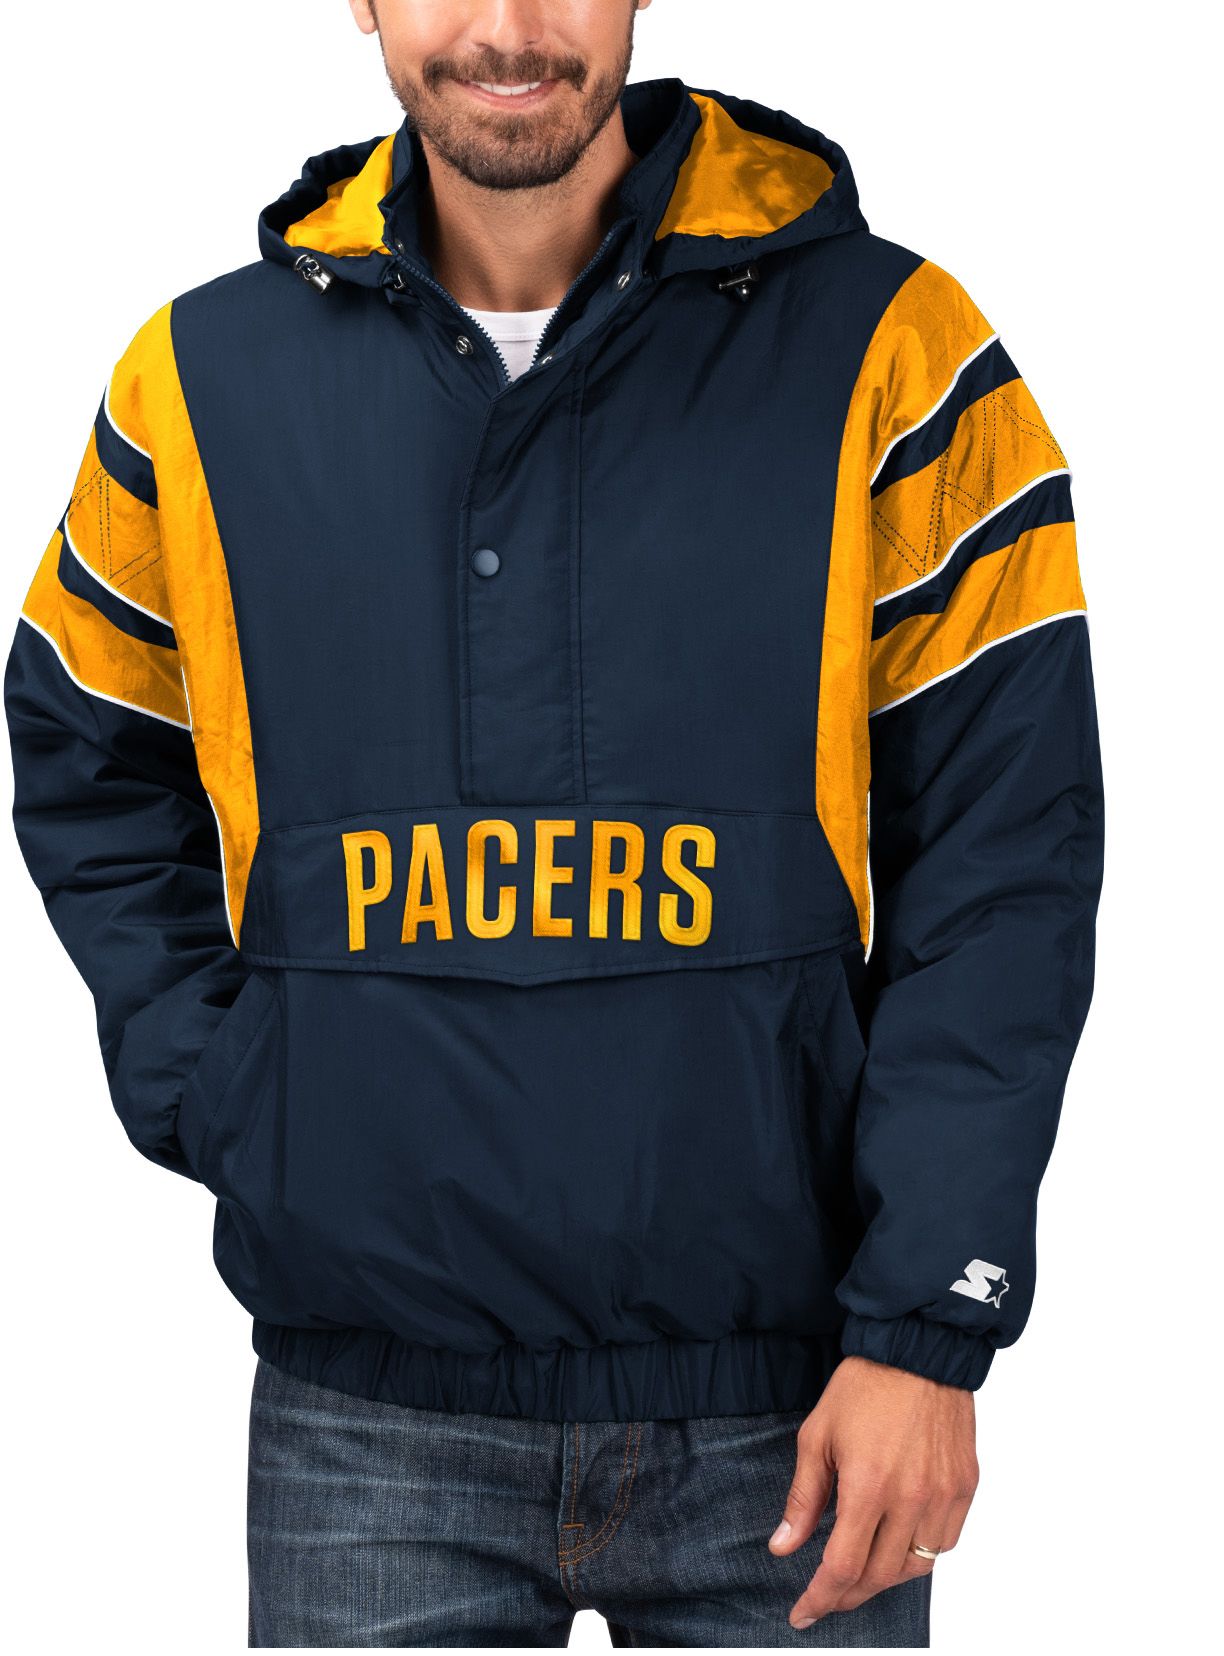 indiana pacers jacket